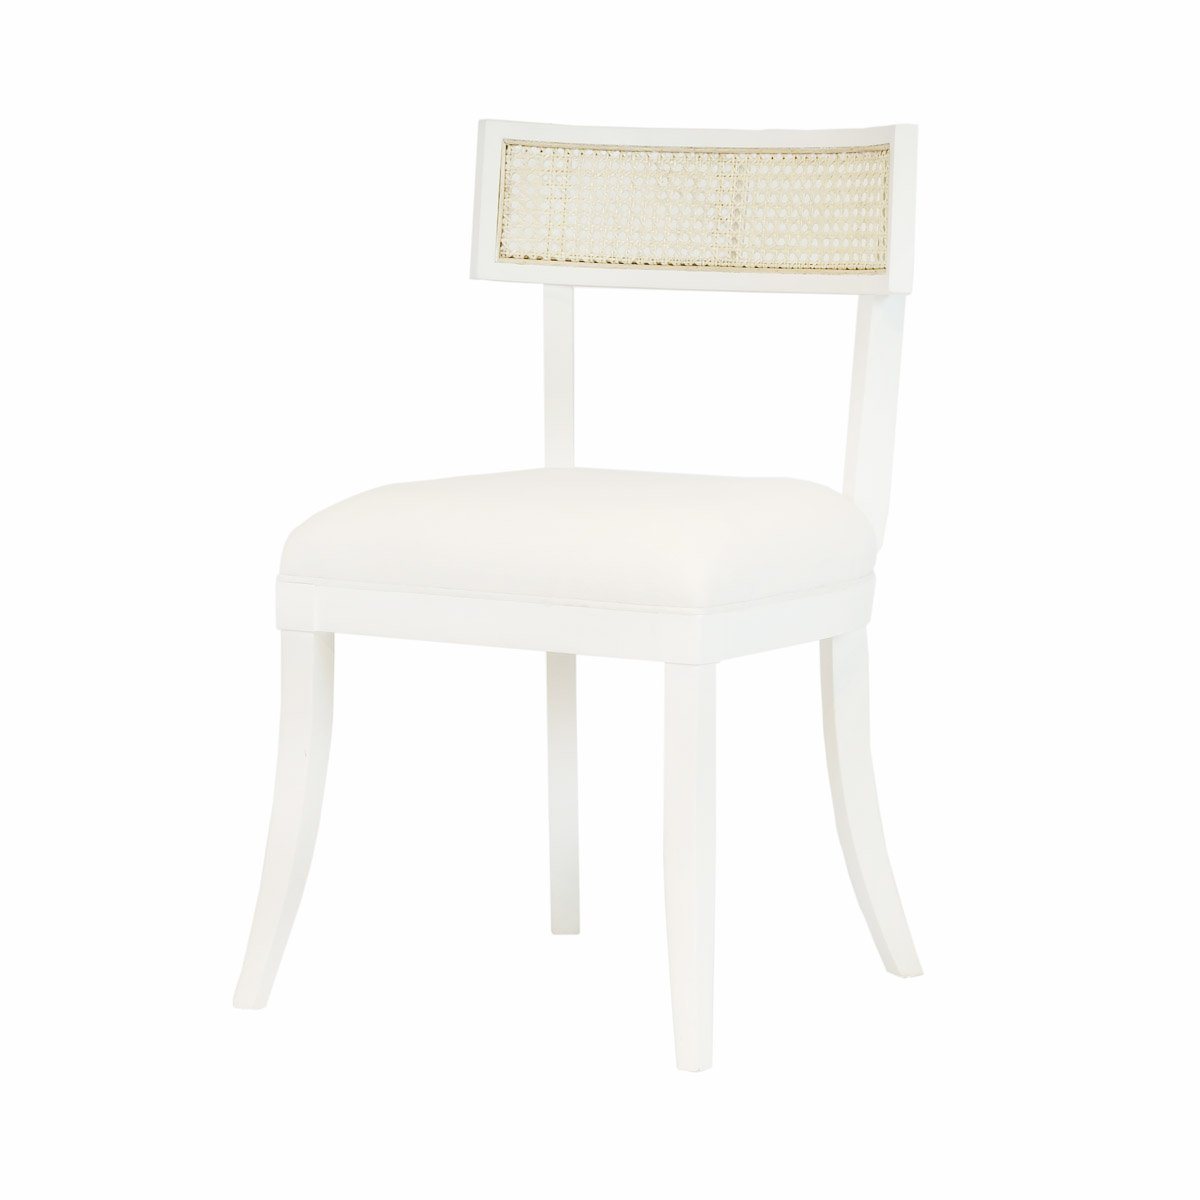 Violet Chair Cerused Oak | White Linen. Left angle view.